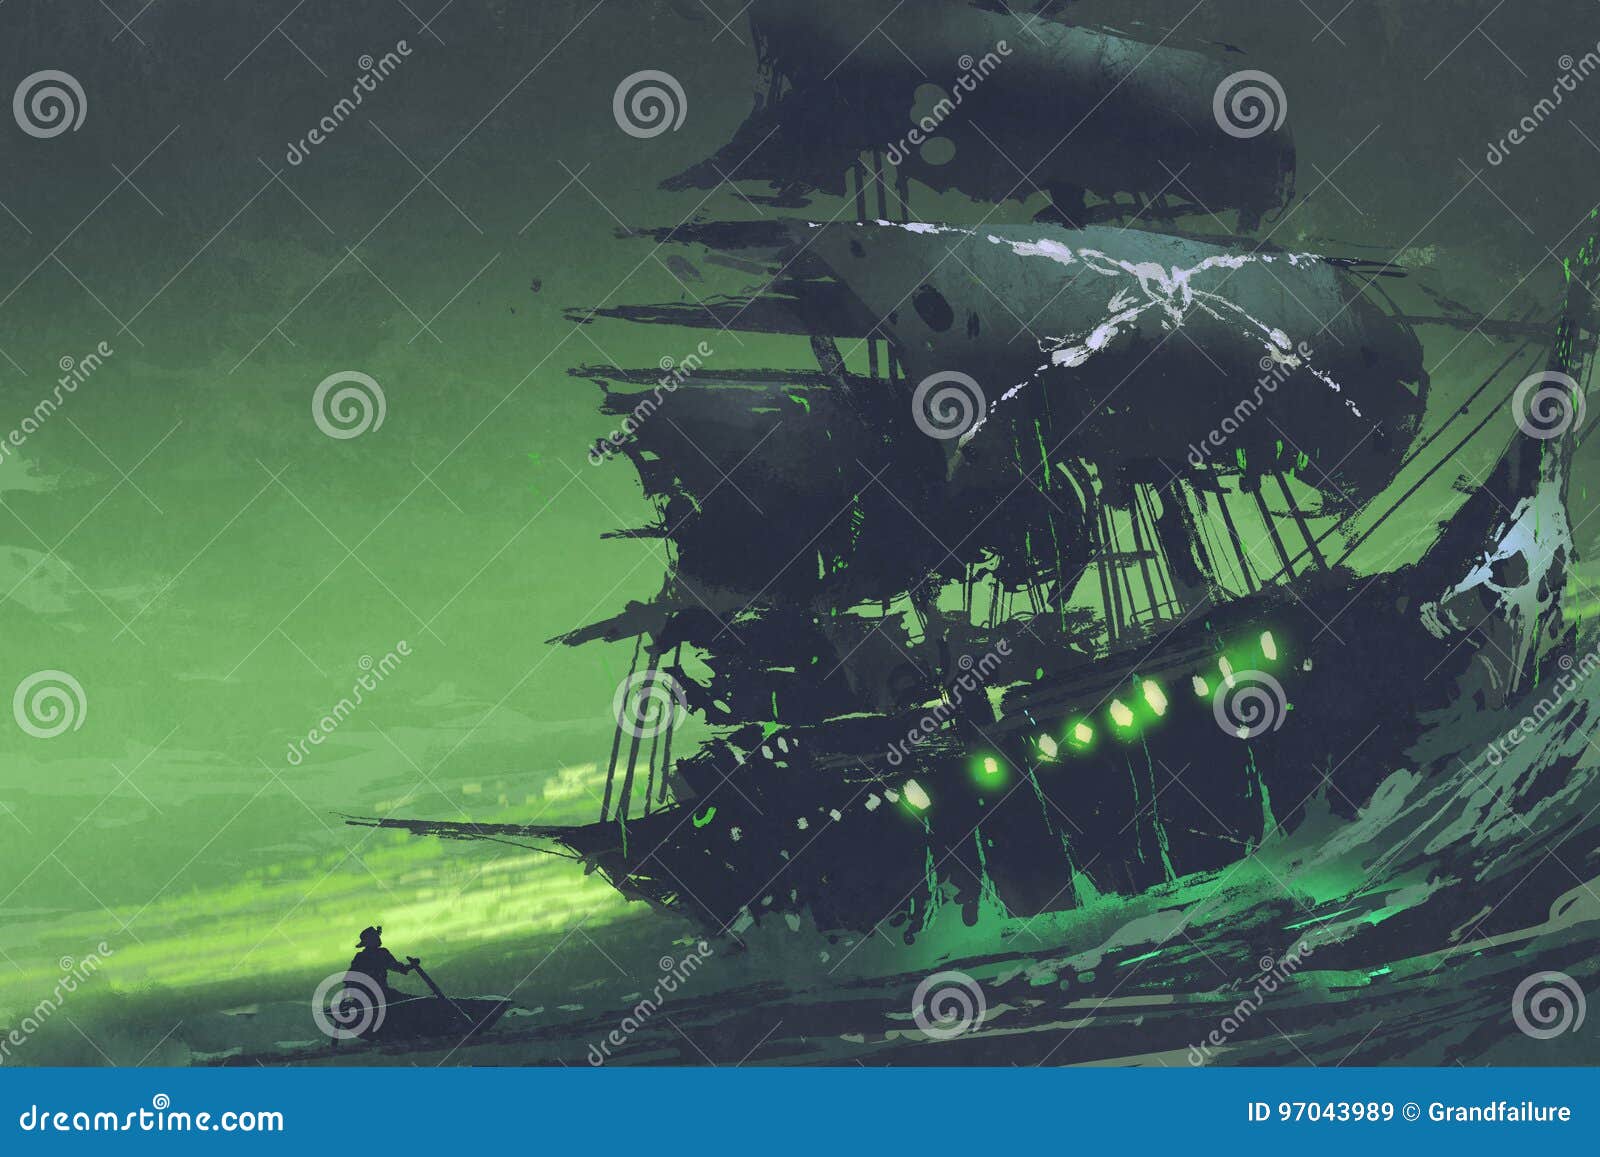 Pirate Ship In Battle, With Cannons Firing And Smoke Rising Royalty ...